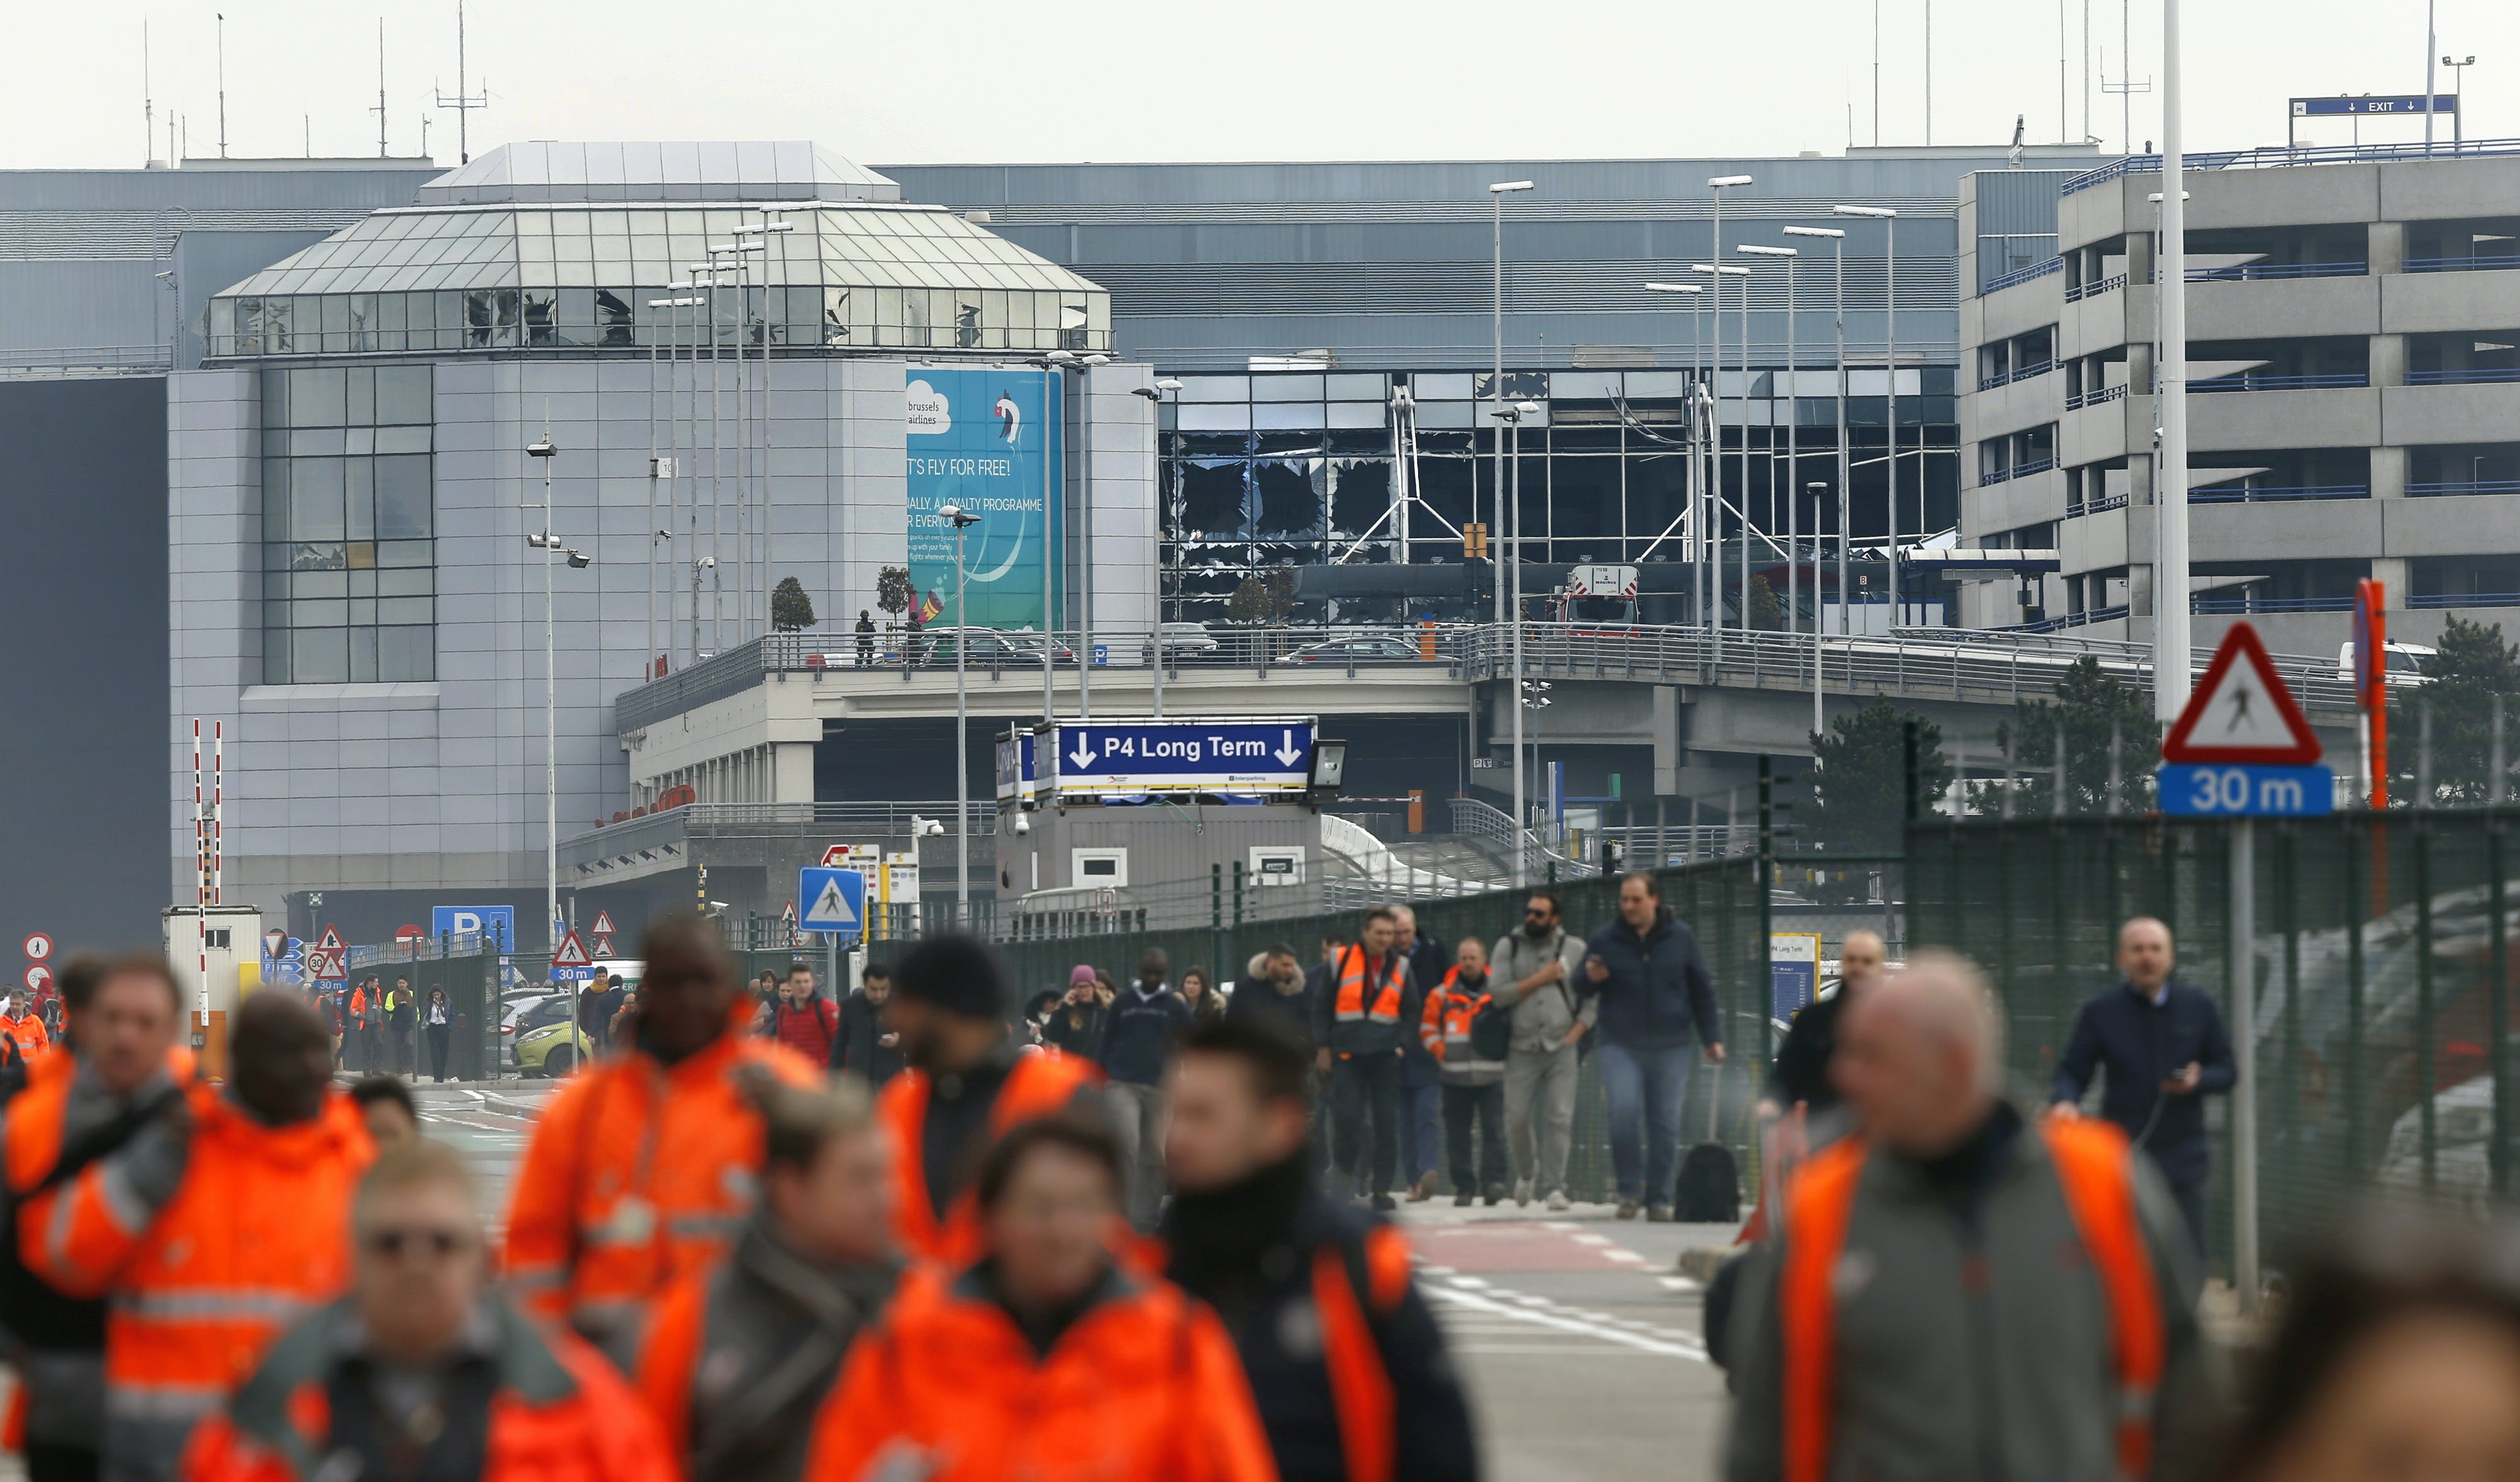 Latest Update: Explosions Strike Brussels, Claiming More Than 30 Lives So Far